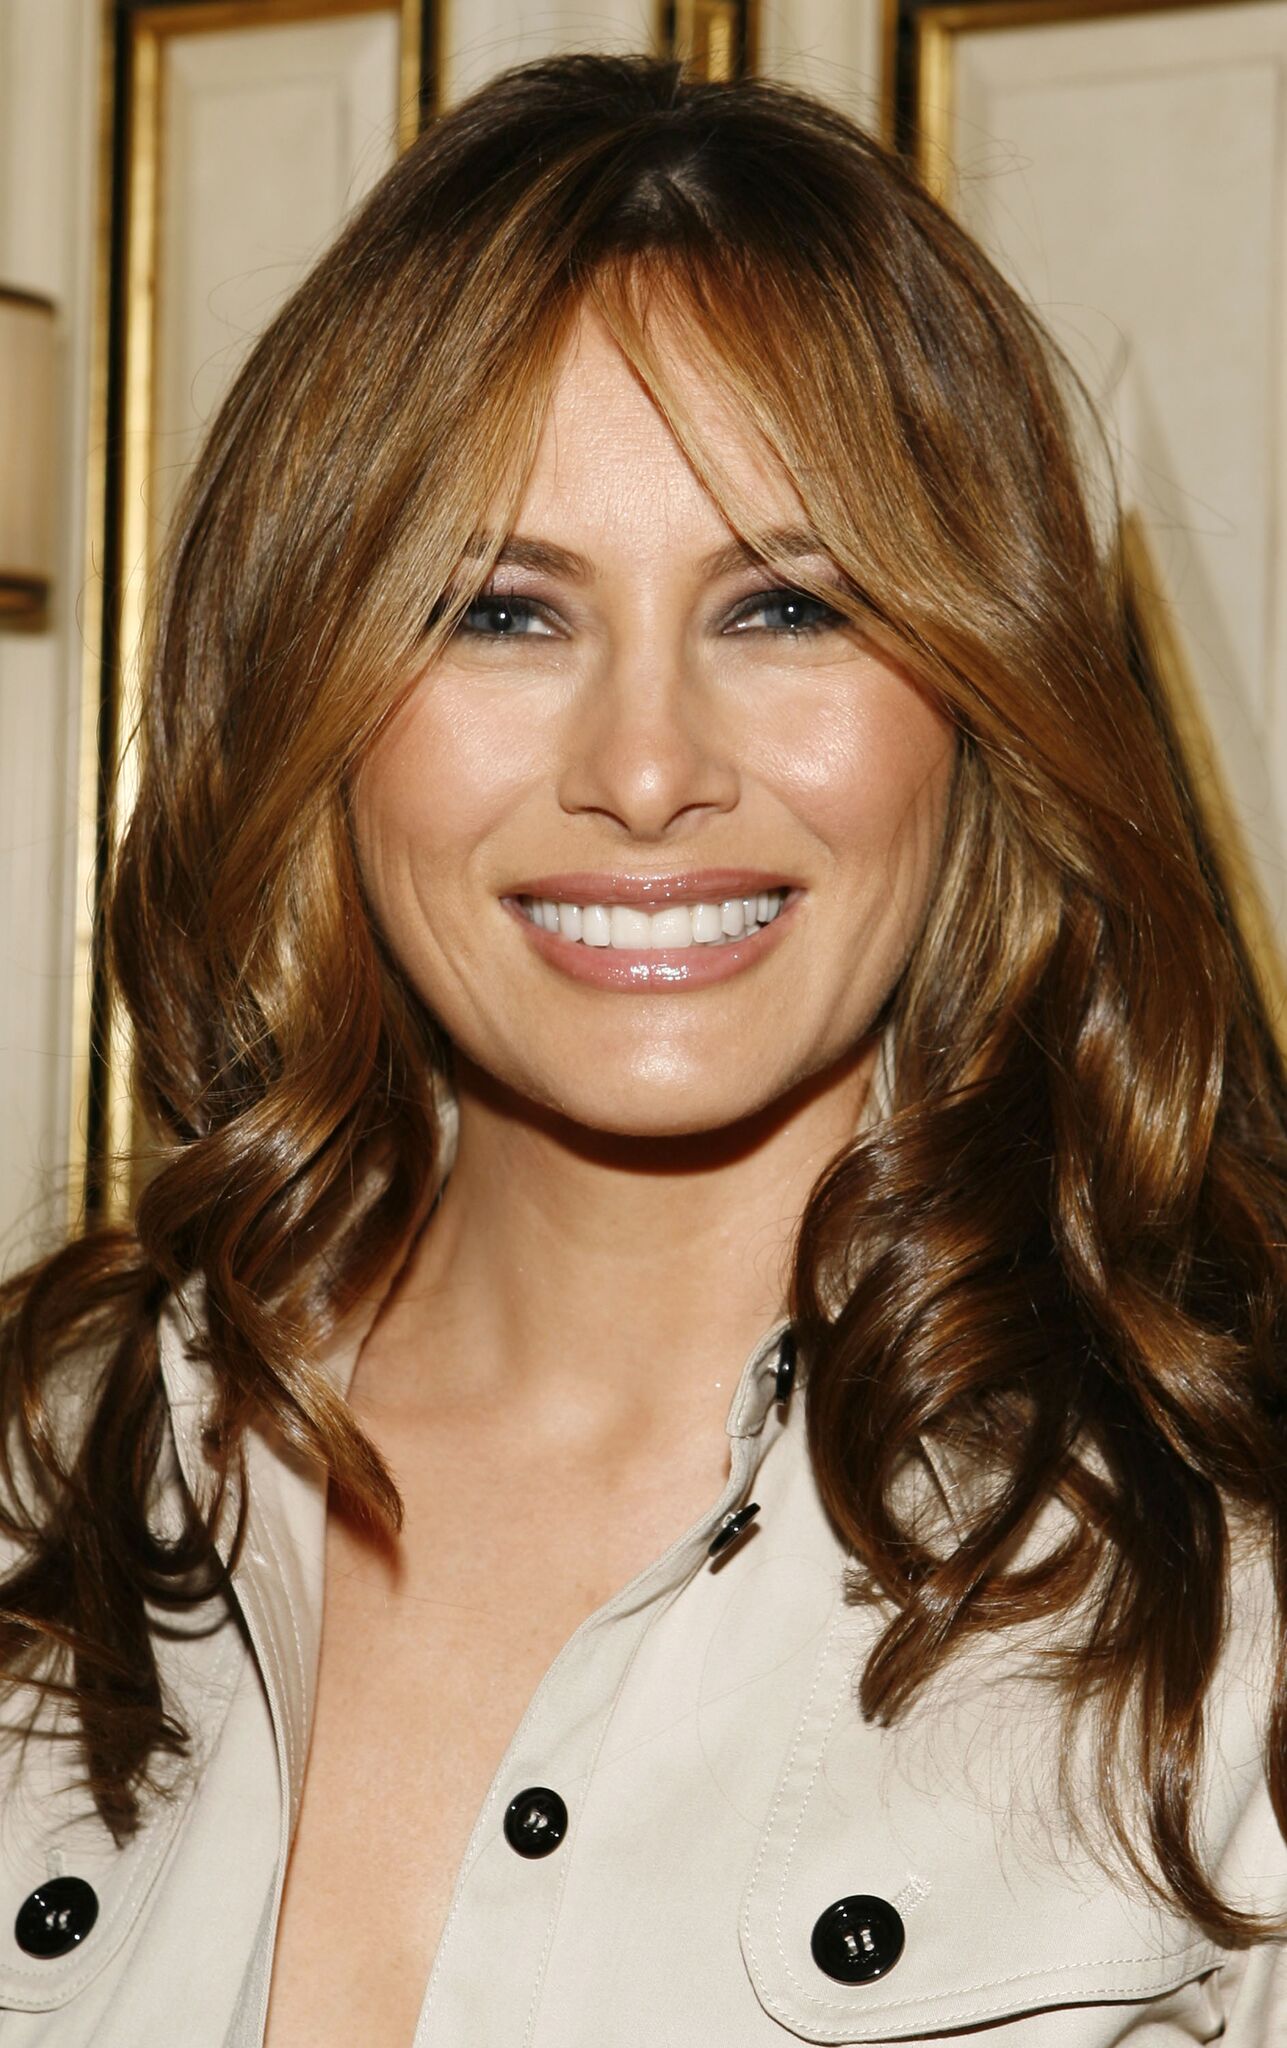 Melania Trump attends the Best & Co. Fashion Show and Breakfast to Benefit Society of Memorial Sloan-Kettering at Bergdorf Goodman on April 12, 2007 | Photo: Getty Images